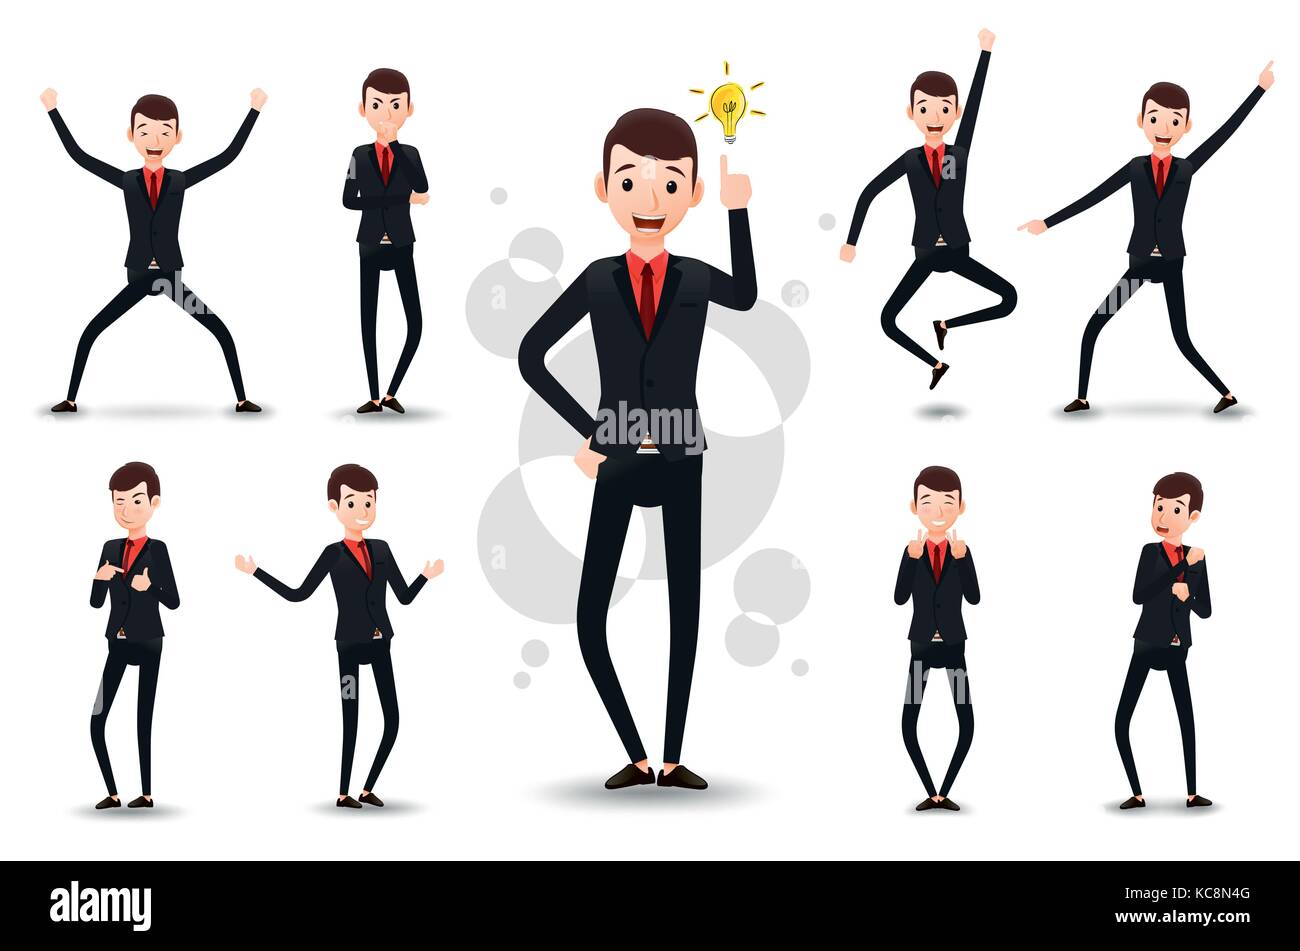 Premium Vector | Cartoon business man wearing shirt and standing in  different poses character creation set.